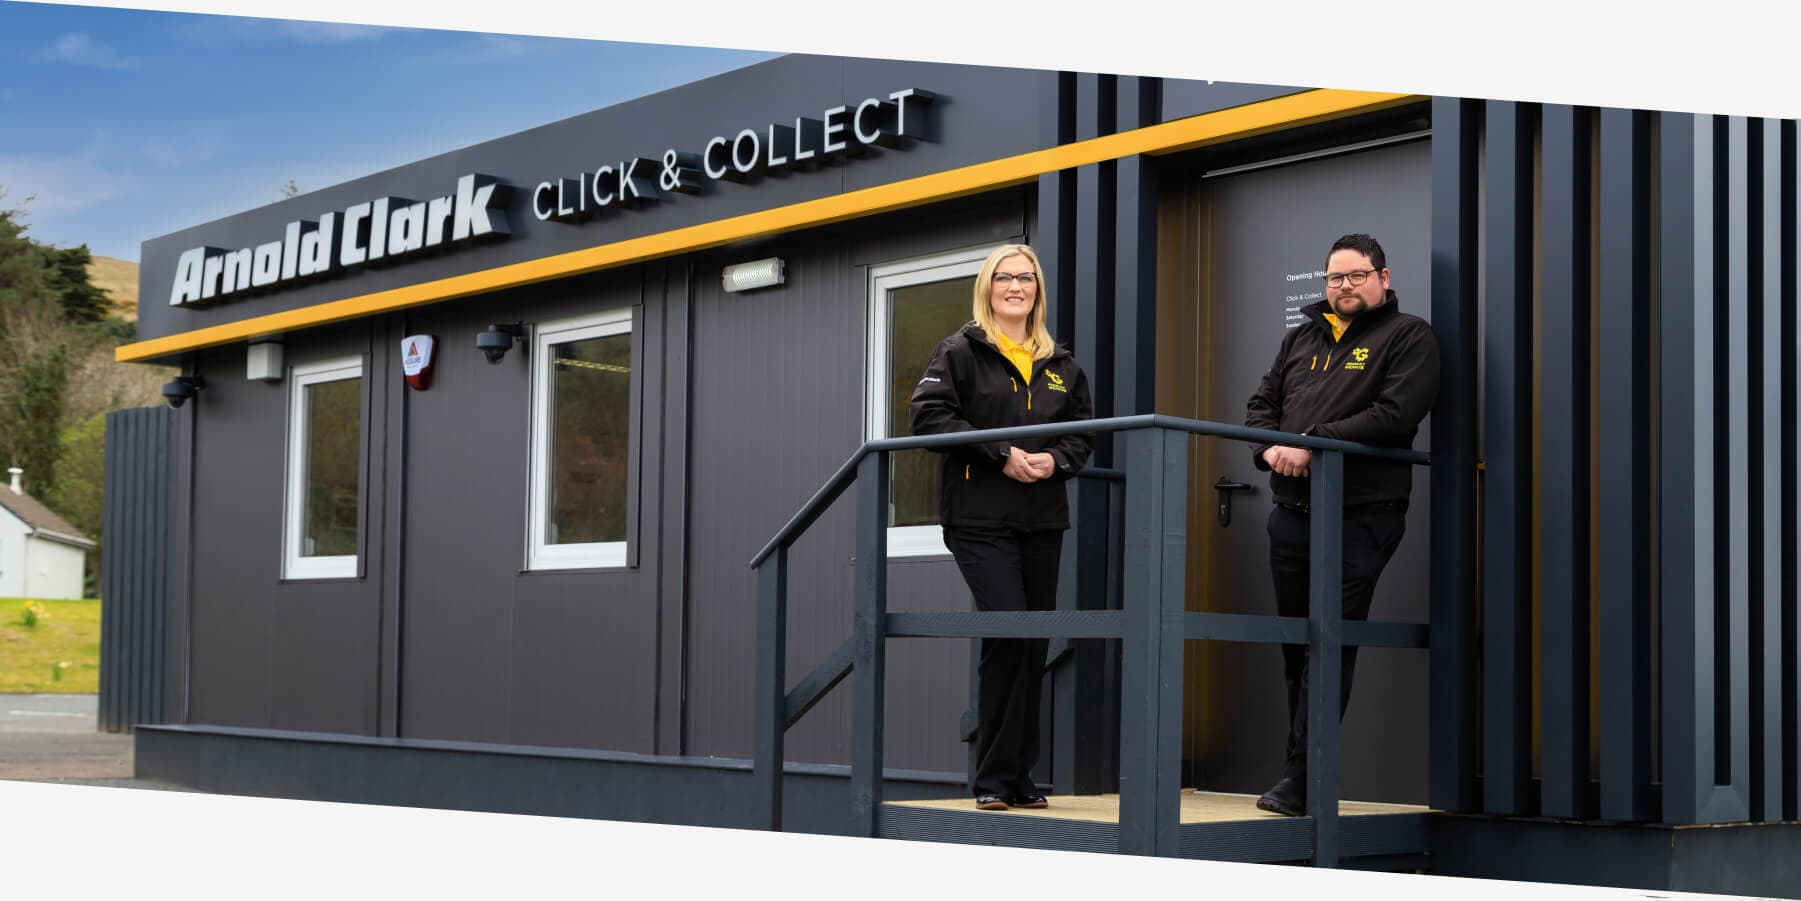 Product geniuses standing outside an Arnold Clark Click & Collect location